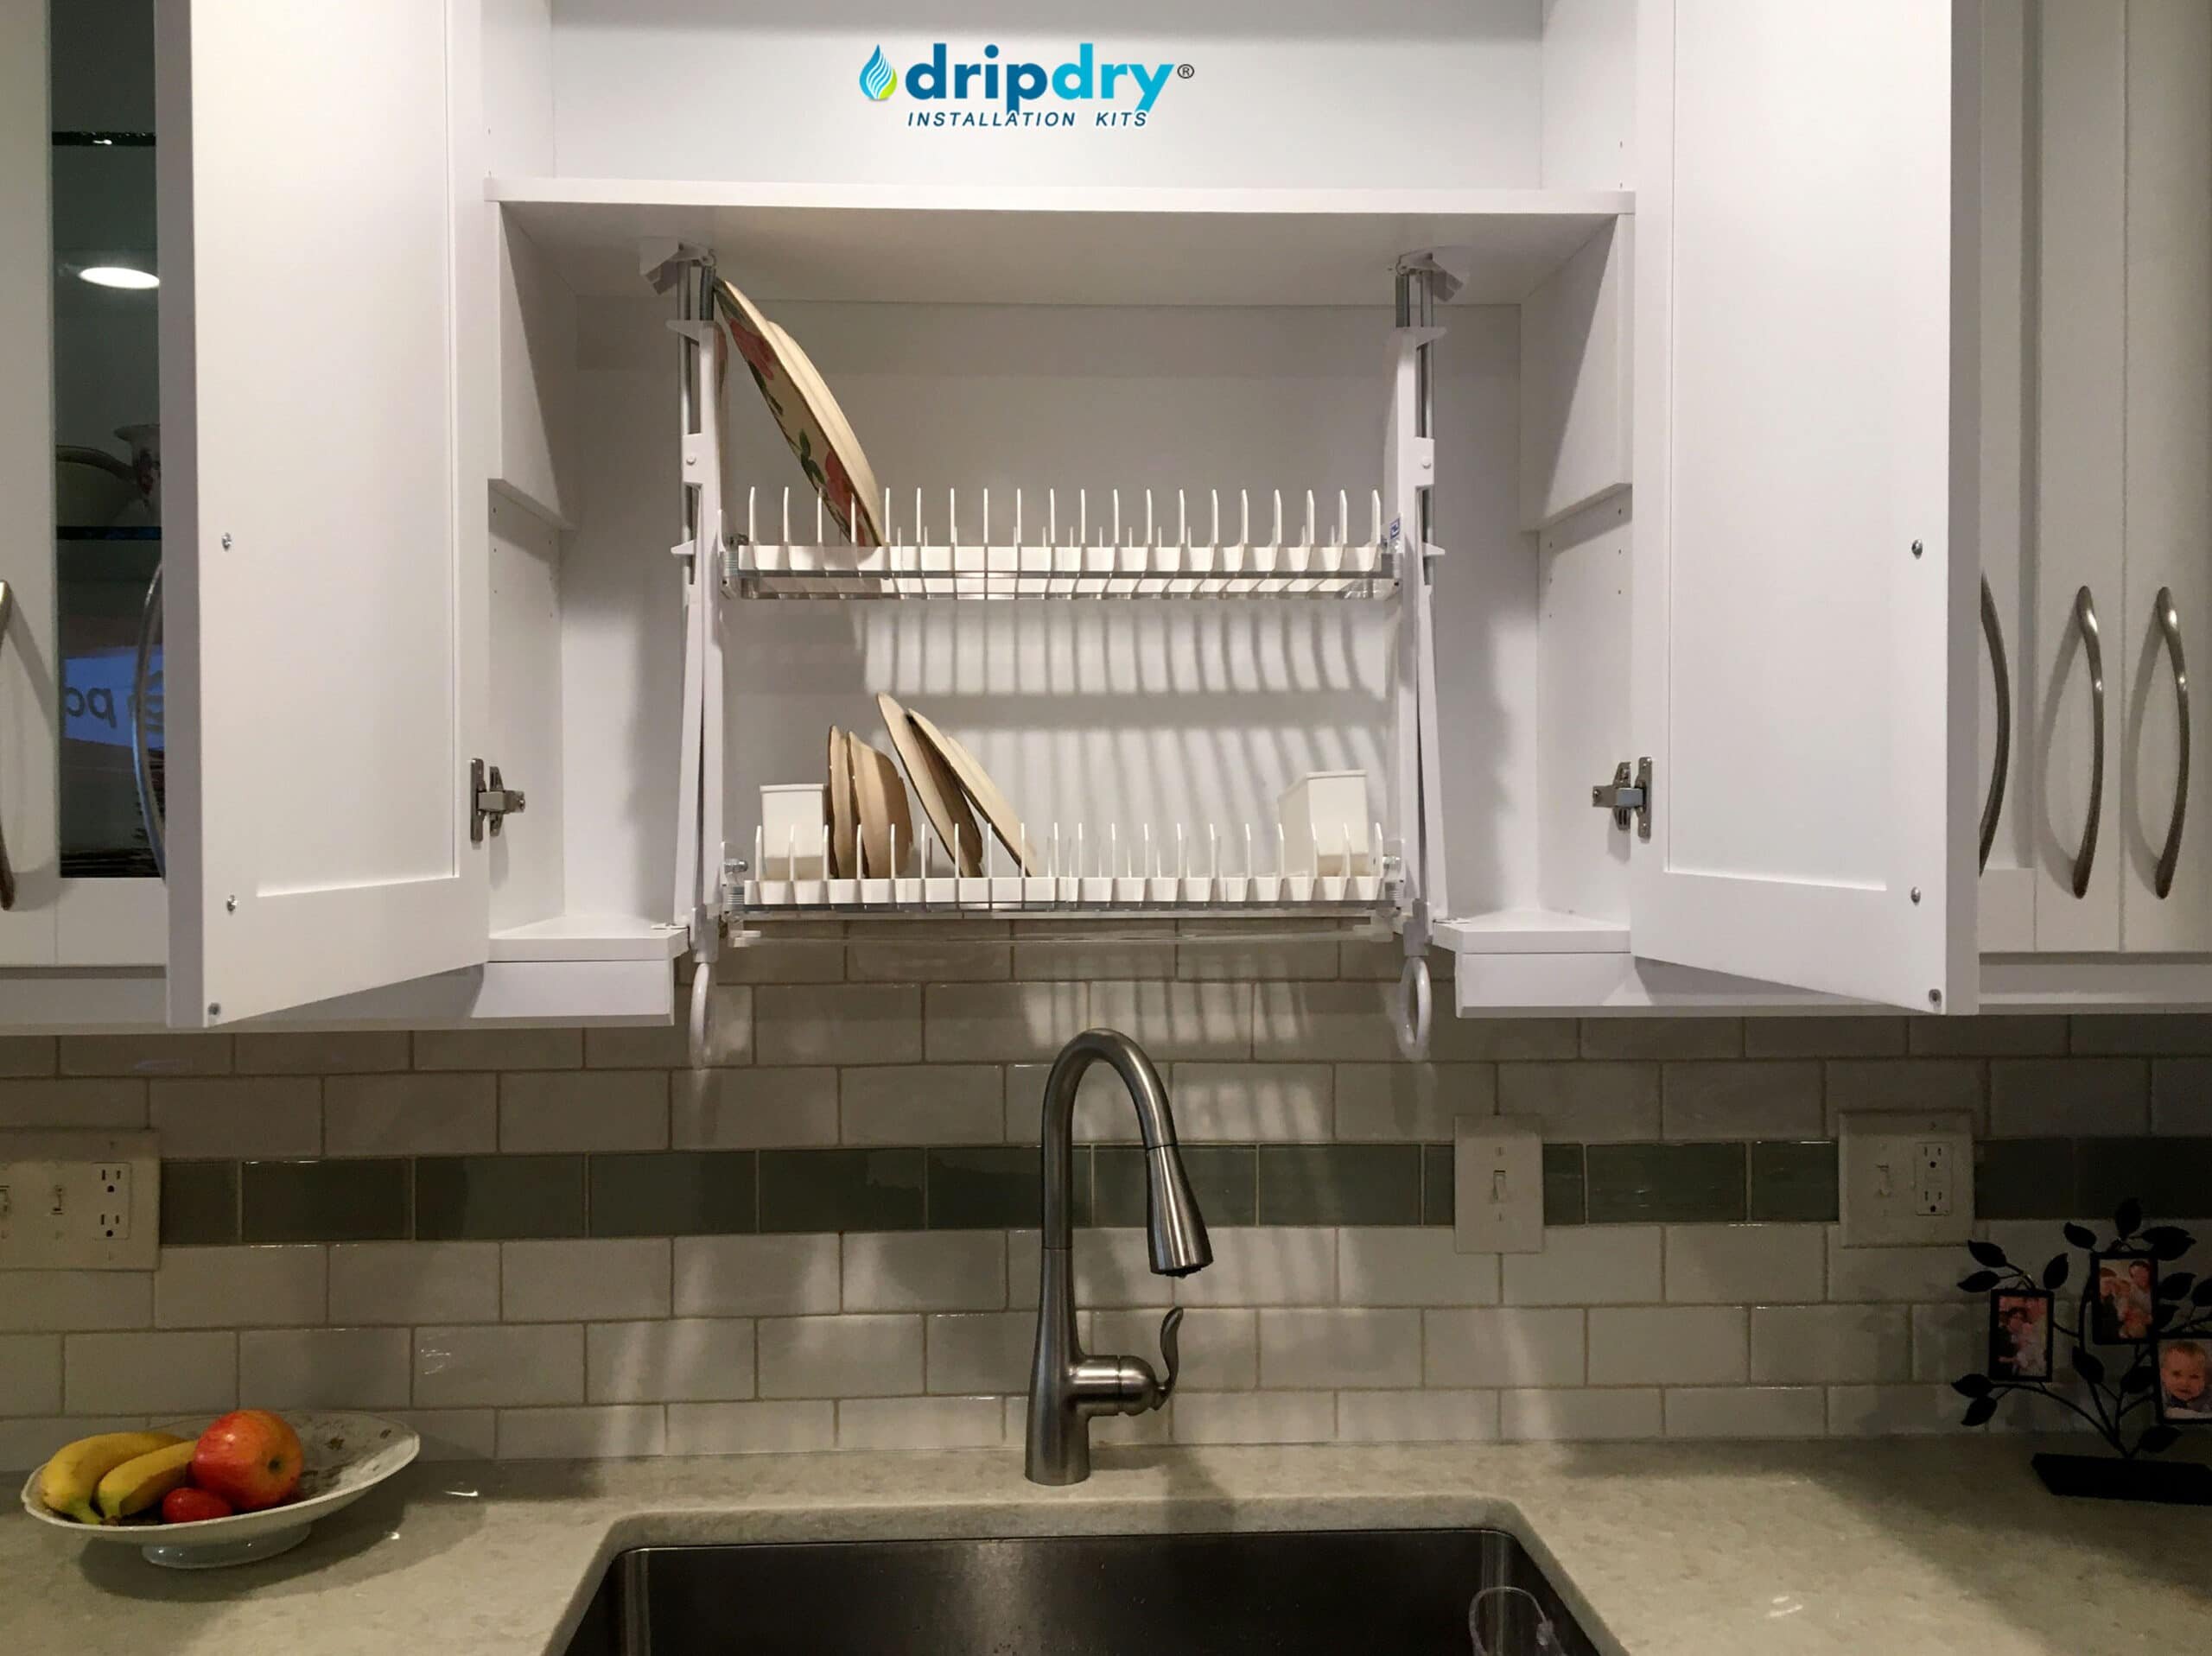 Dripdry Drying Rack Fits All Cabinets A Hidden Cabinet Dish Rack